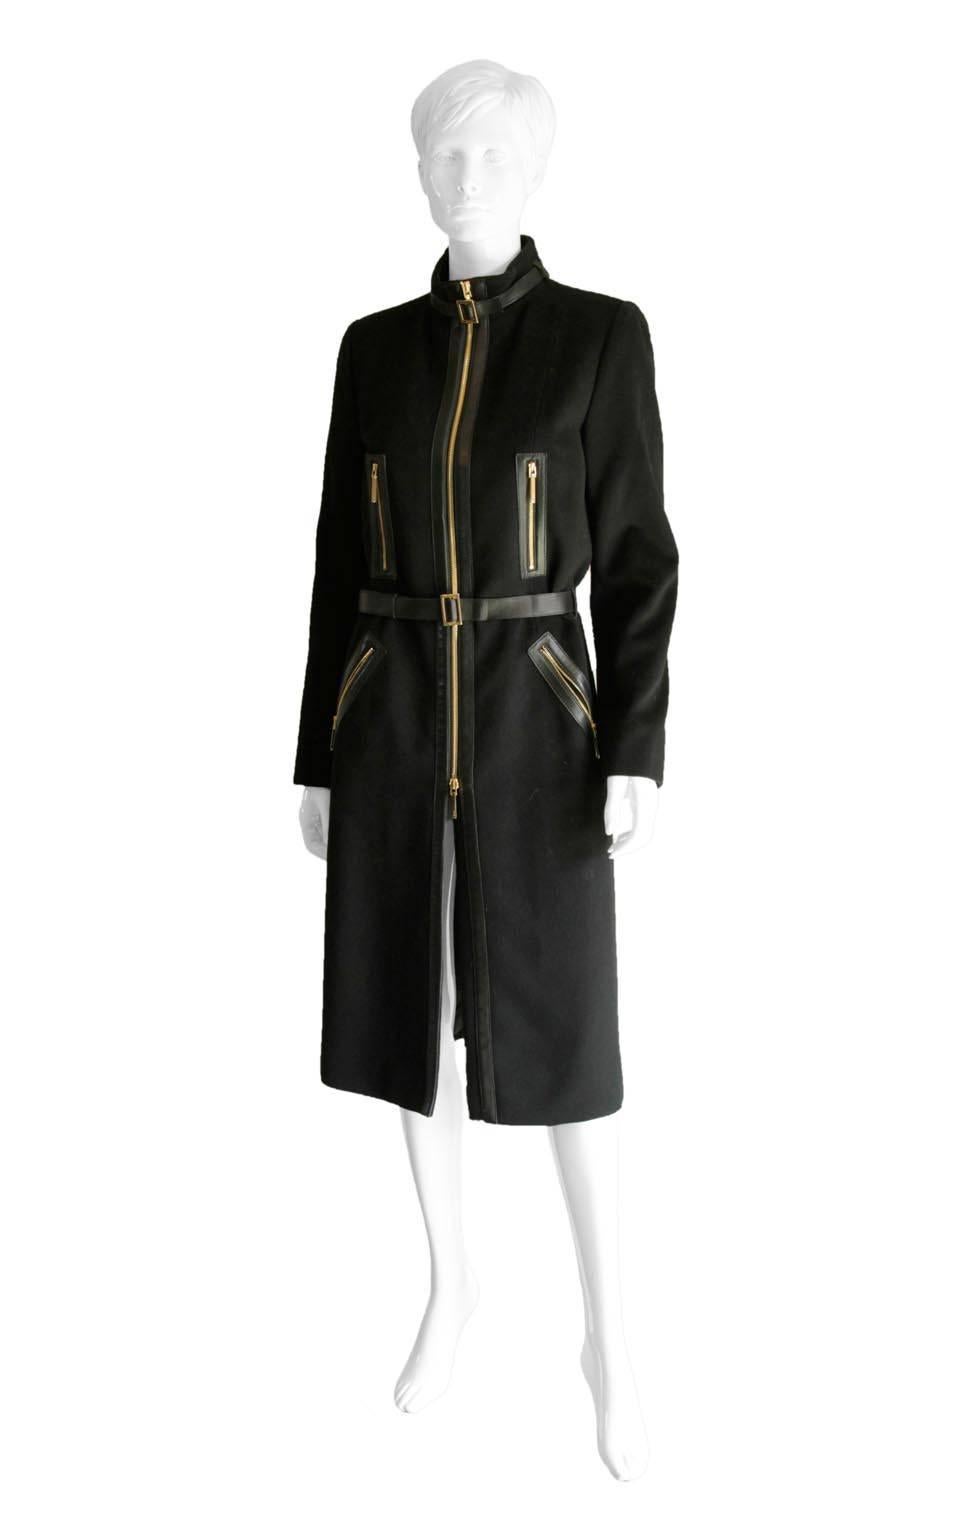 That Heavenly Black Wool Cashmere Coat From Tom Ford's Fall Winter 2001 Collection For Gucci!

The Iconic Collections has been one of the world's leading collectors of Tom Ford for Gucci & Yves Saint Laurent Rive Gauche, as well as early pieces